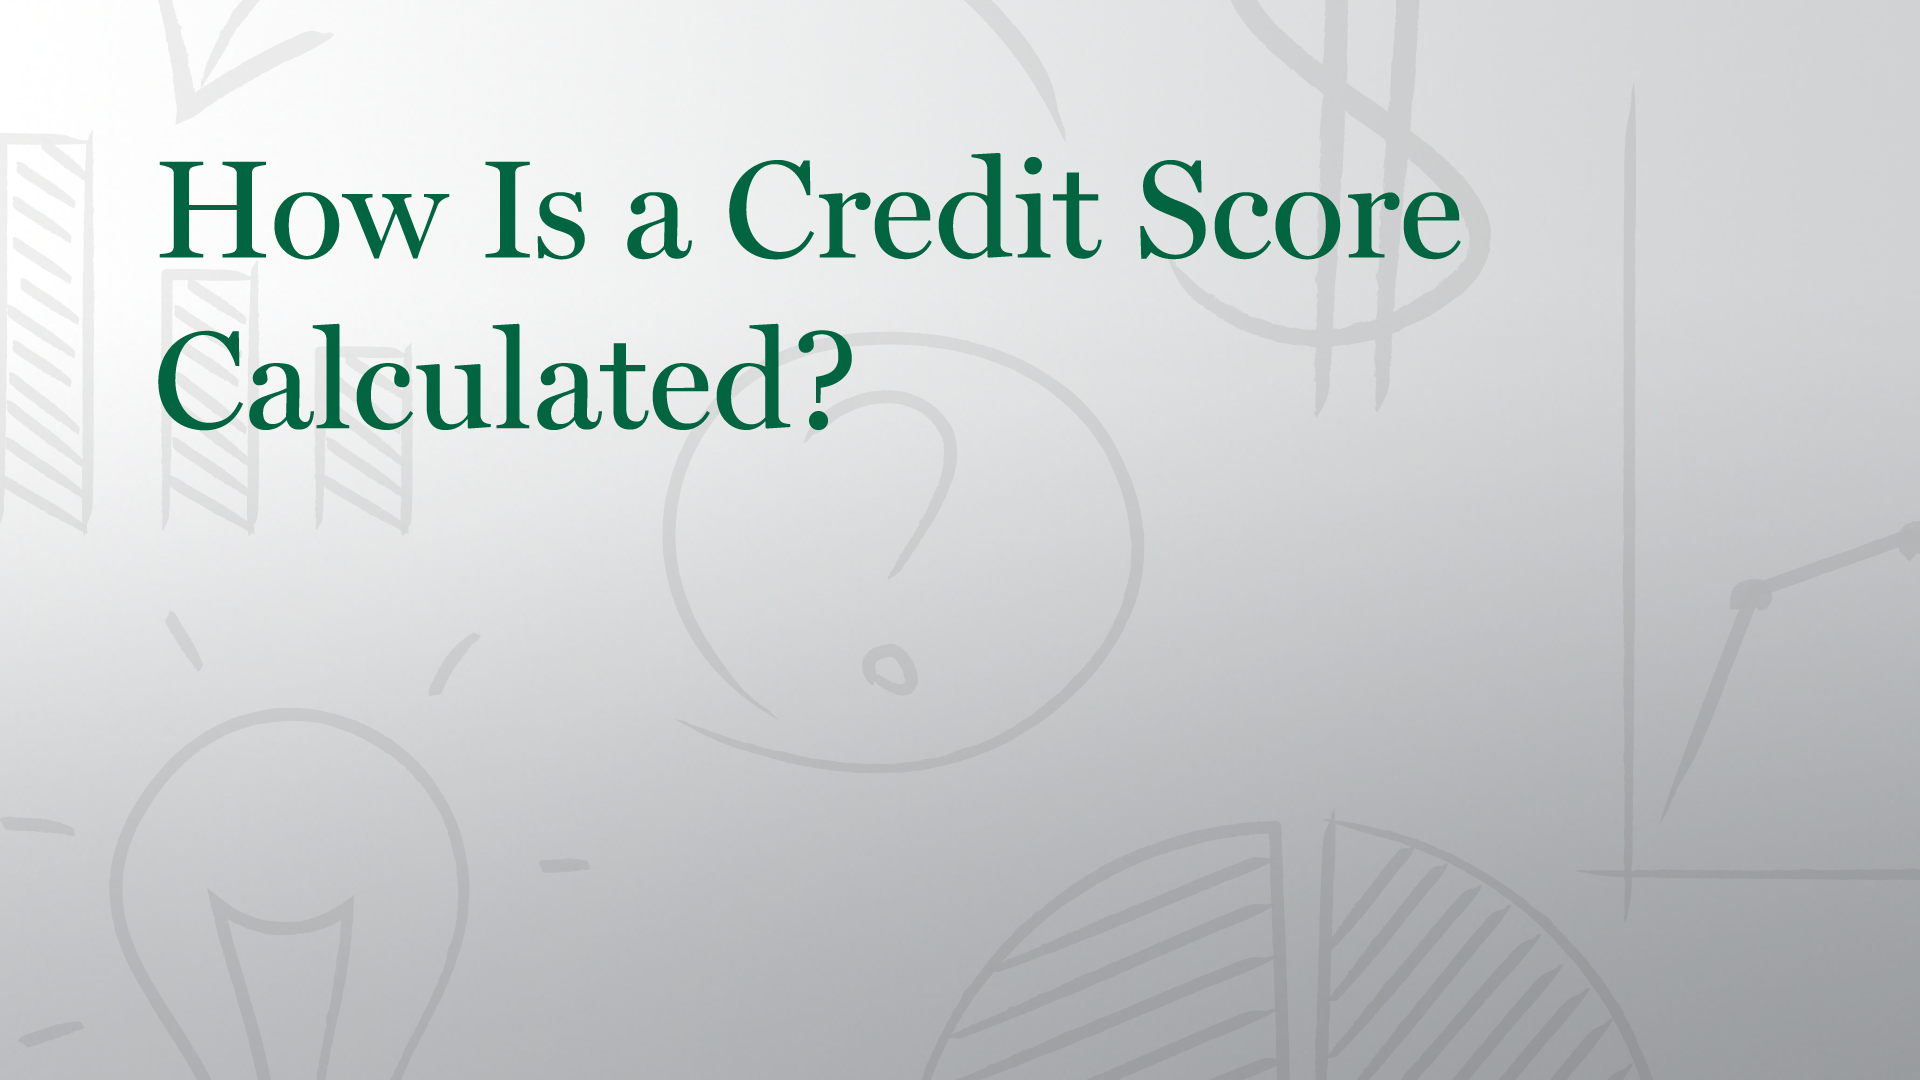 How Is a Credit Score Calculated?